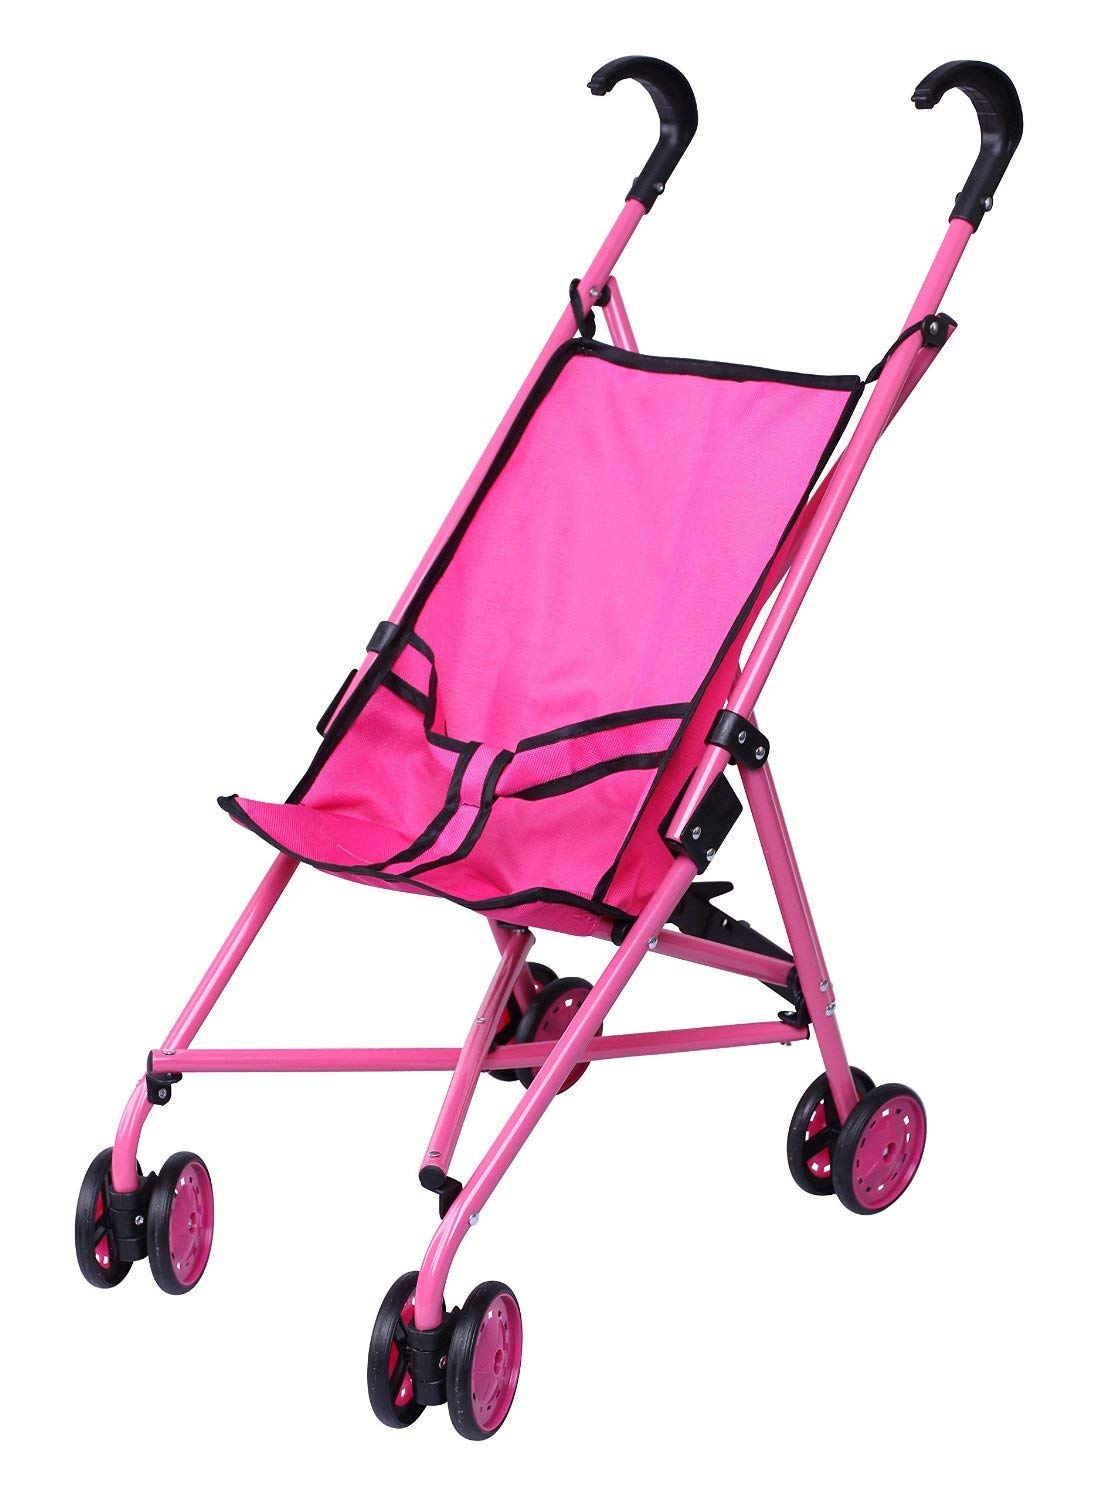 Top 10 Baby Doll Strollers in 2020 - Highly Recommended in 2020